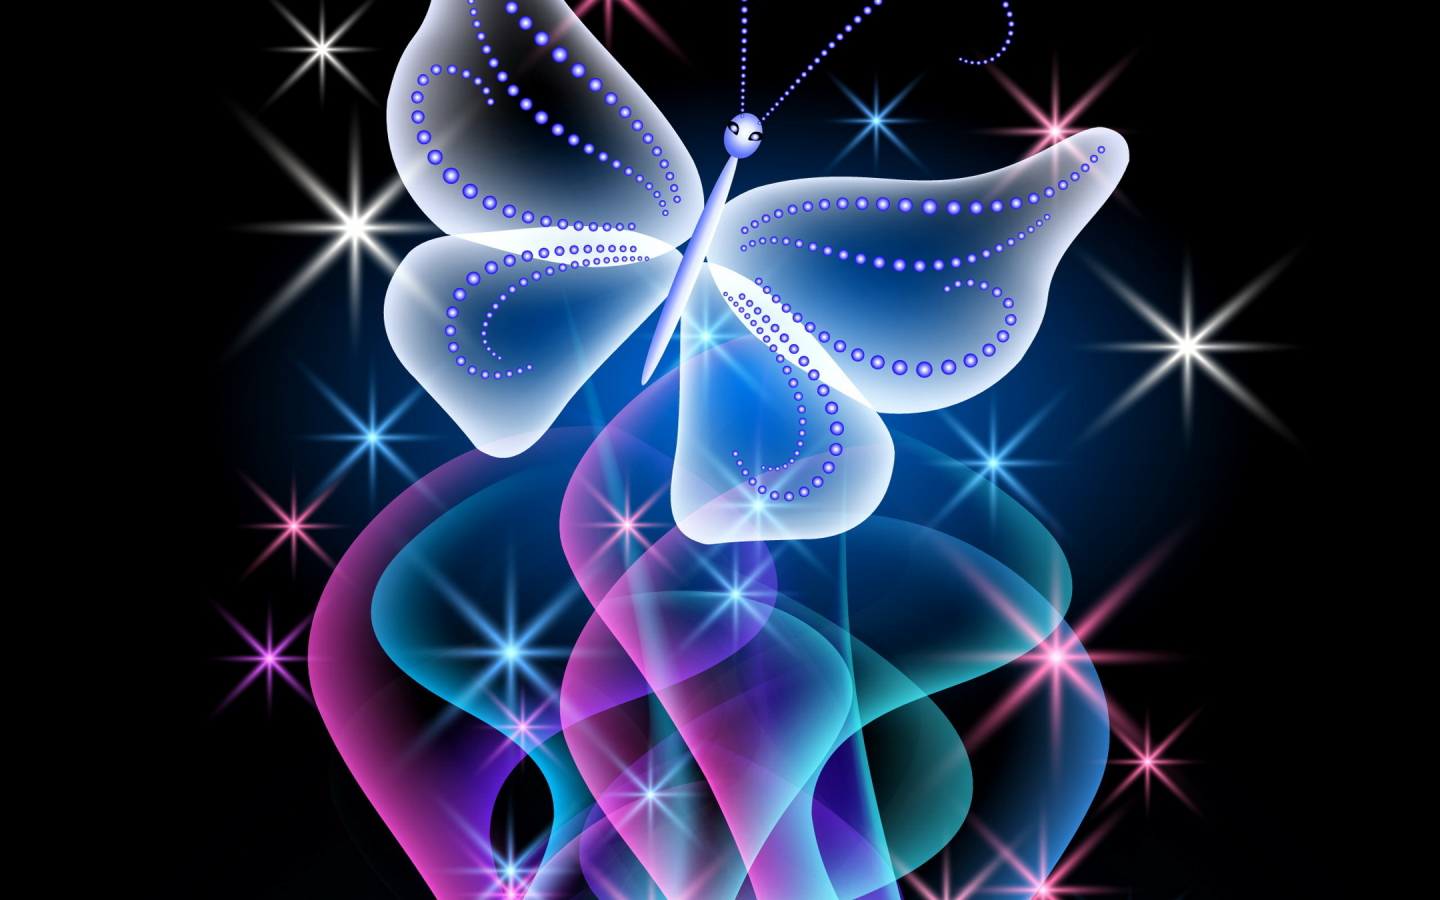 неоновая, pink, sparkle, neon, бабочка, design, abstract, blue, glow, butterfly